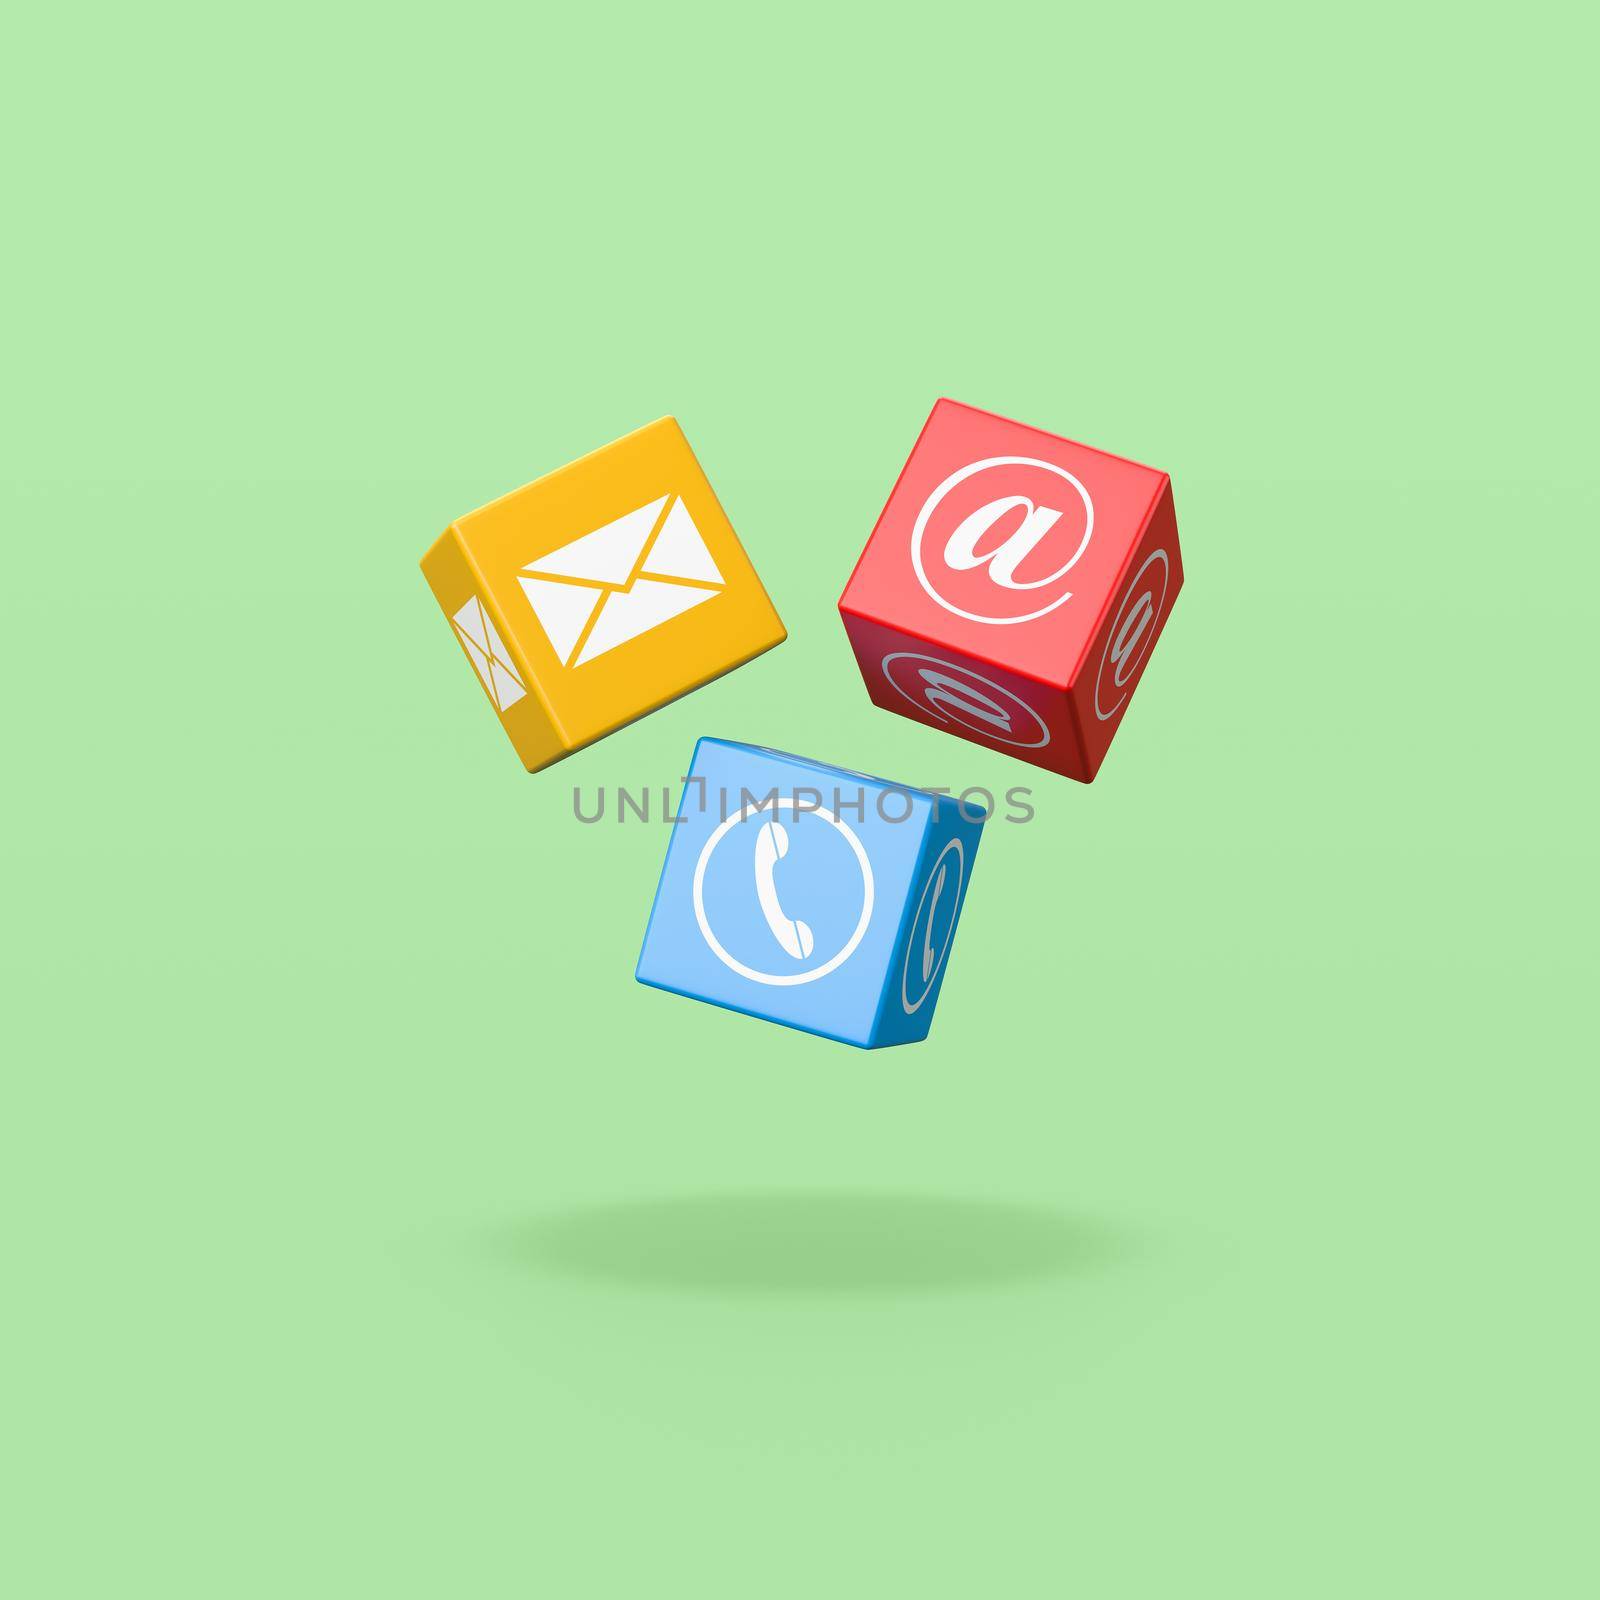 Contact Channels Colorful Cubes Set on Flat Green Background with Shadow 3D Illustration